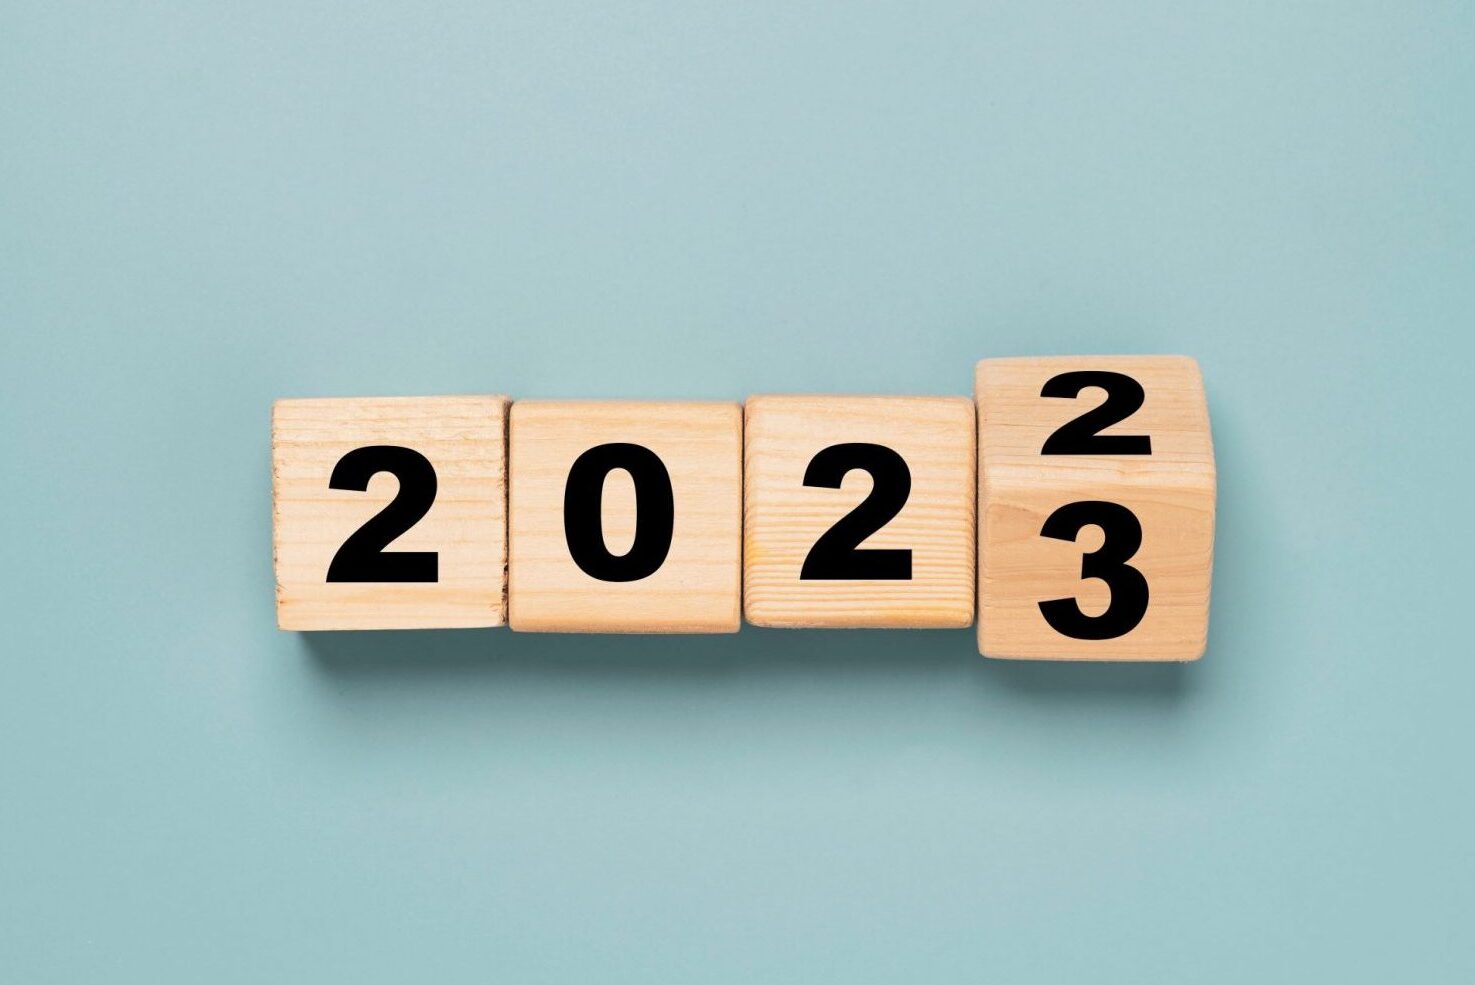 Top IT Trends in 2023. 2022 blocks, the "2" turning over to a "3 making it 2023.